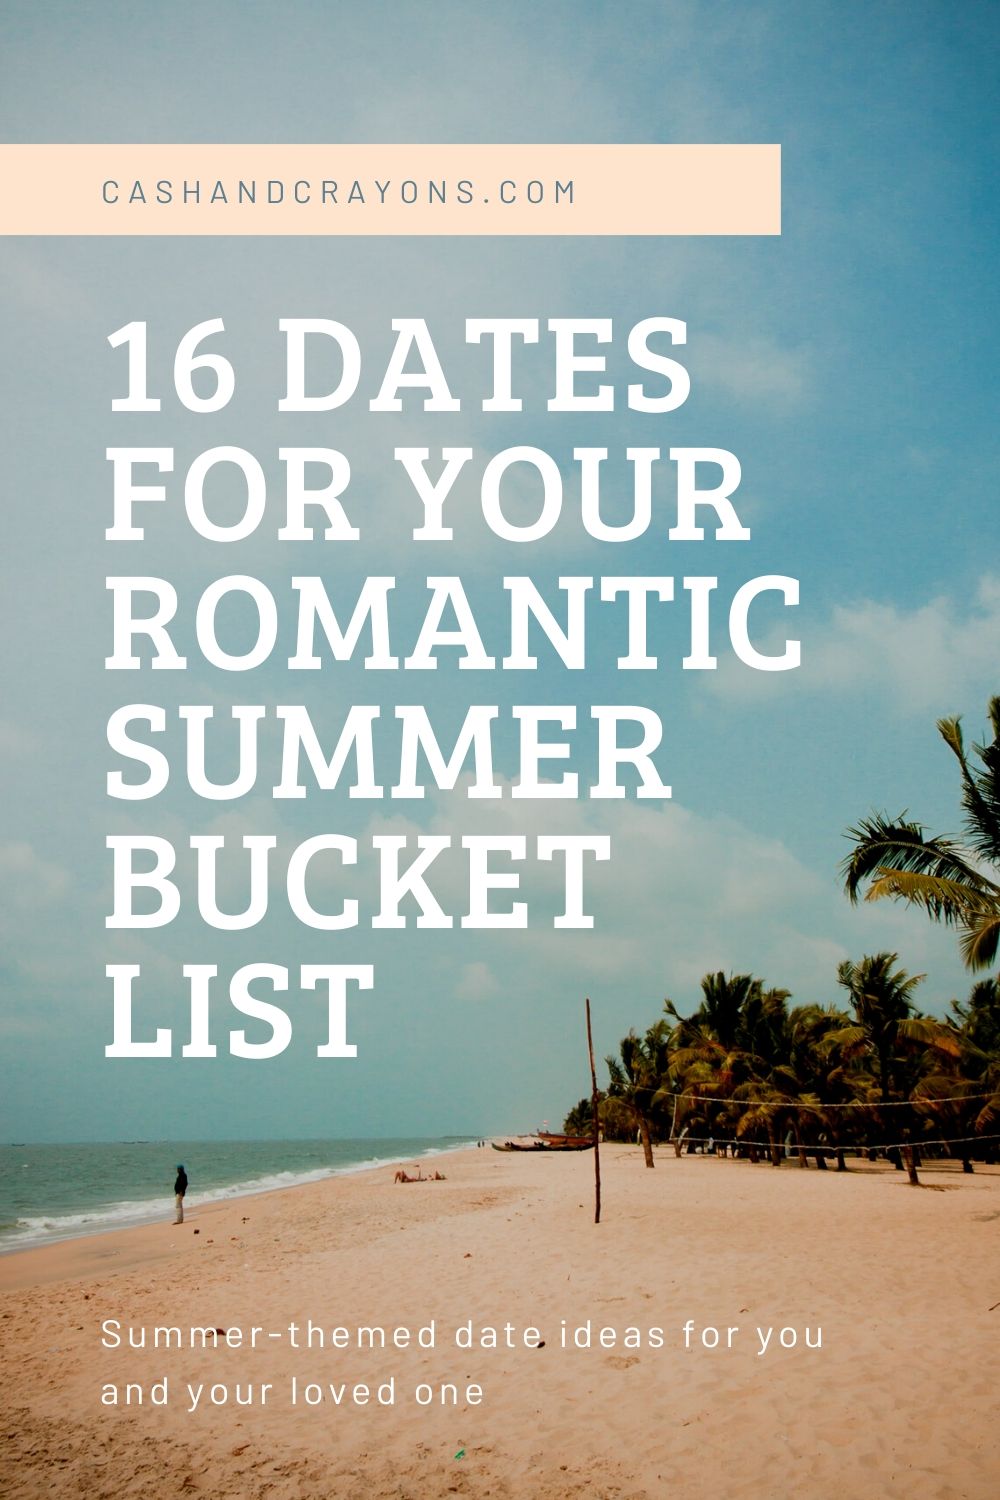 16 Dates for Your Romantic Summer Bucket List (+free printable!)